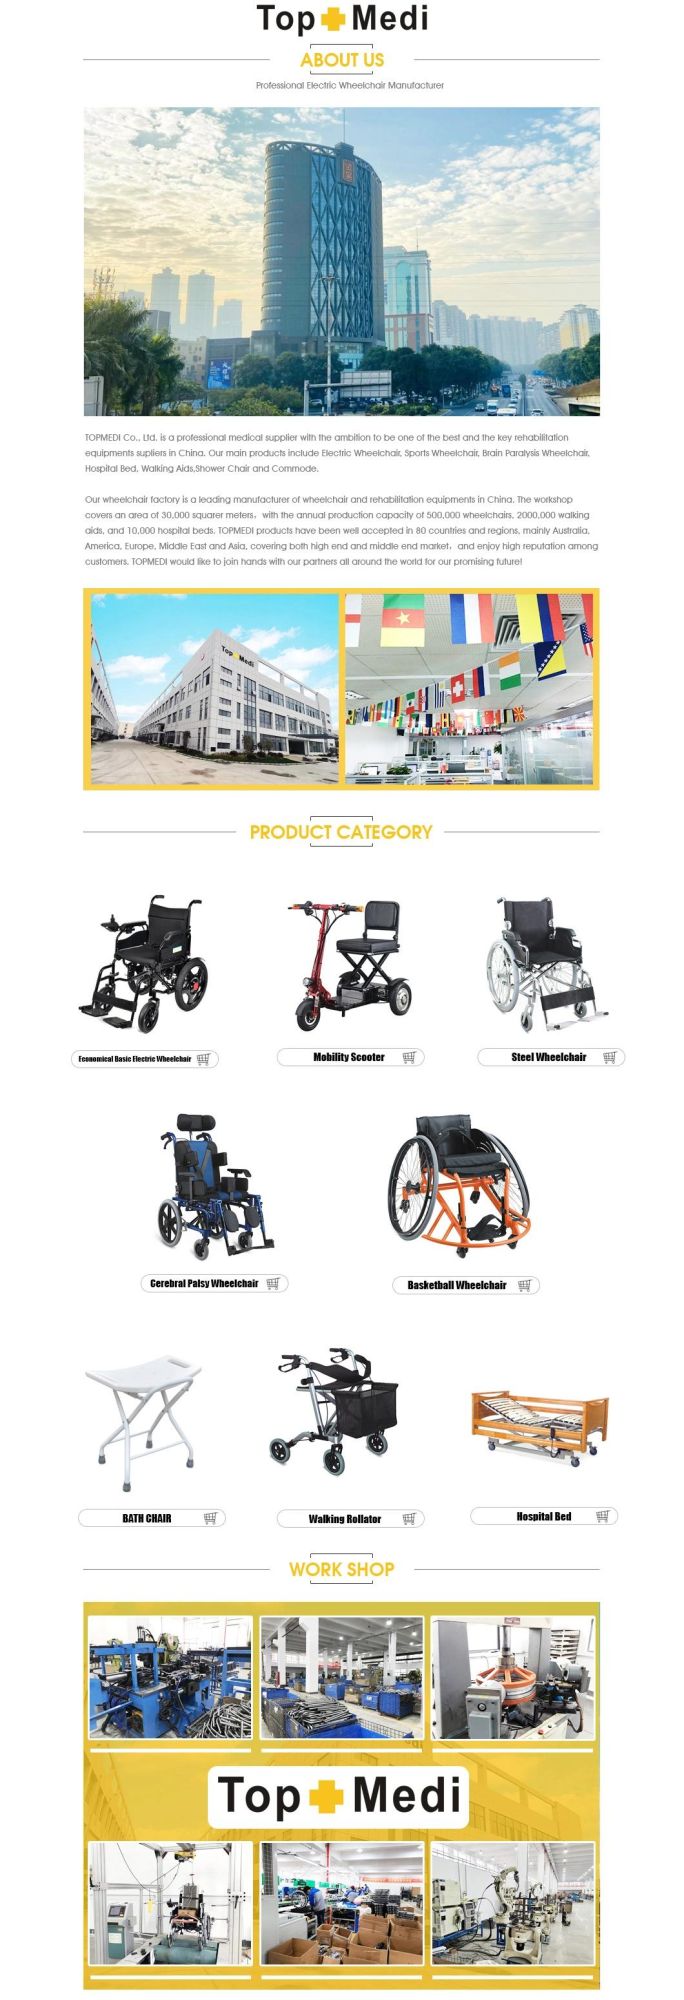 Foldable Electric Wheelchair for The Handicapped with CE Certification